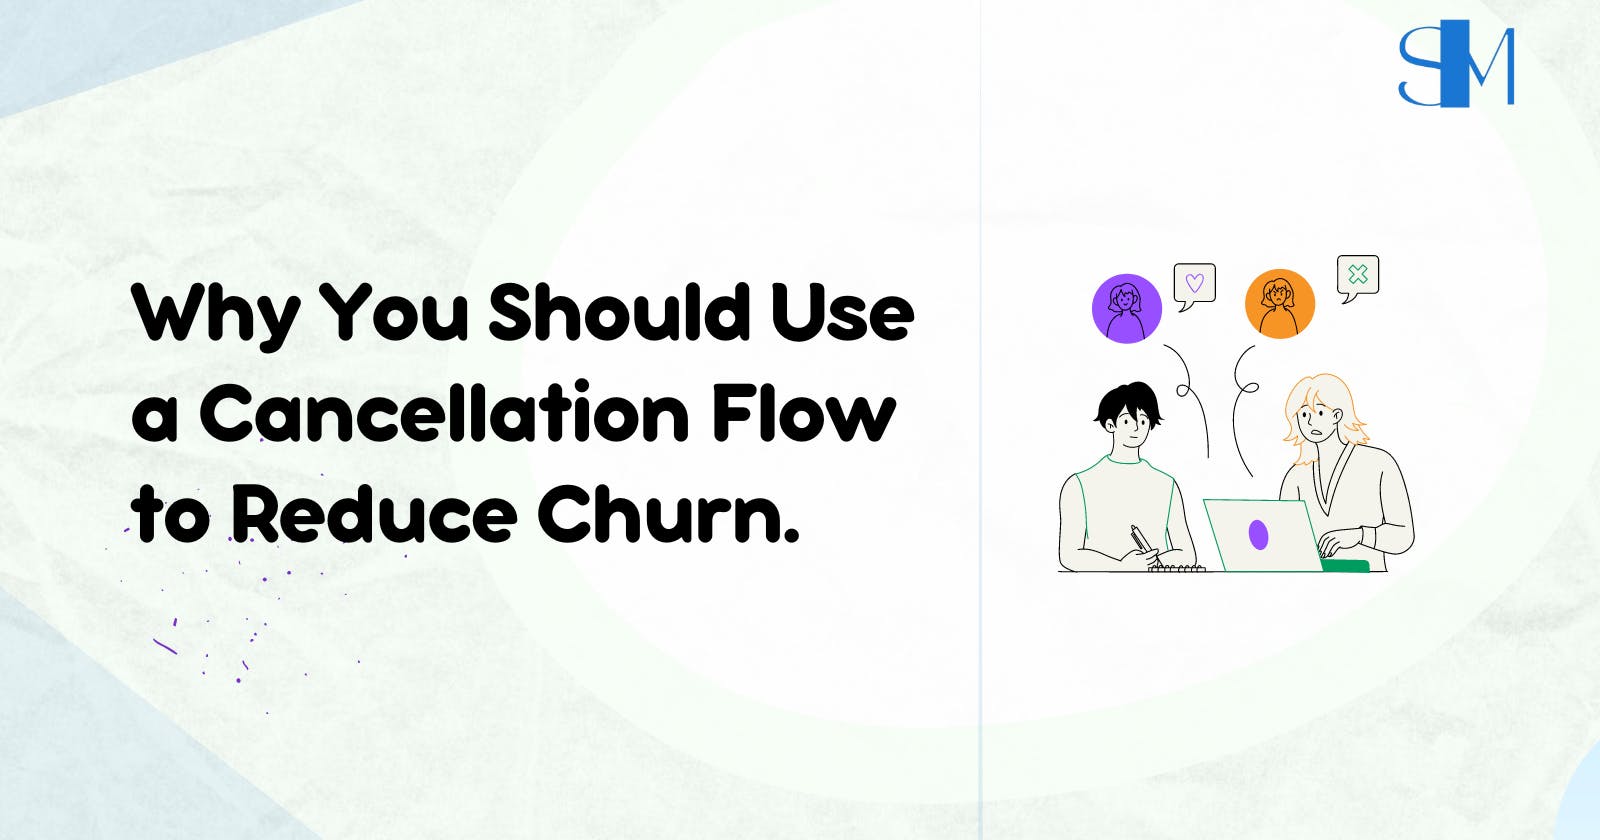 Why You Should Use a Cancellation Flow to Reduce Churn.